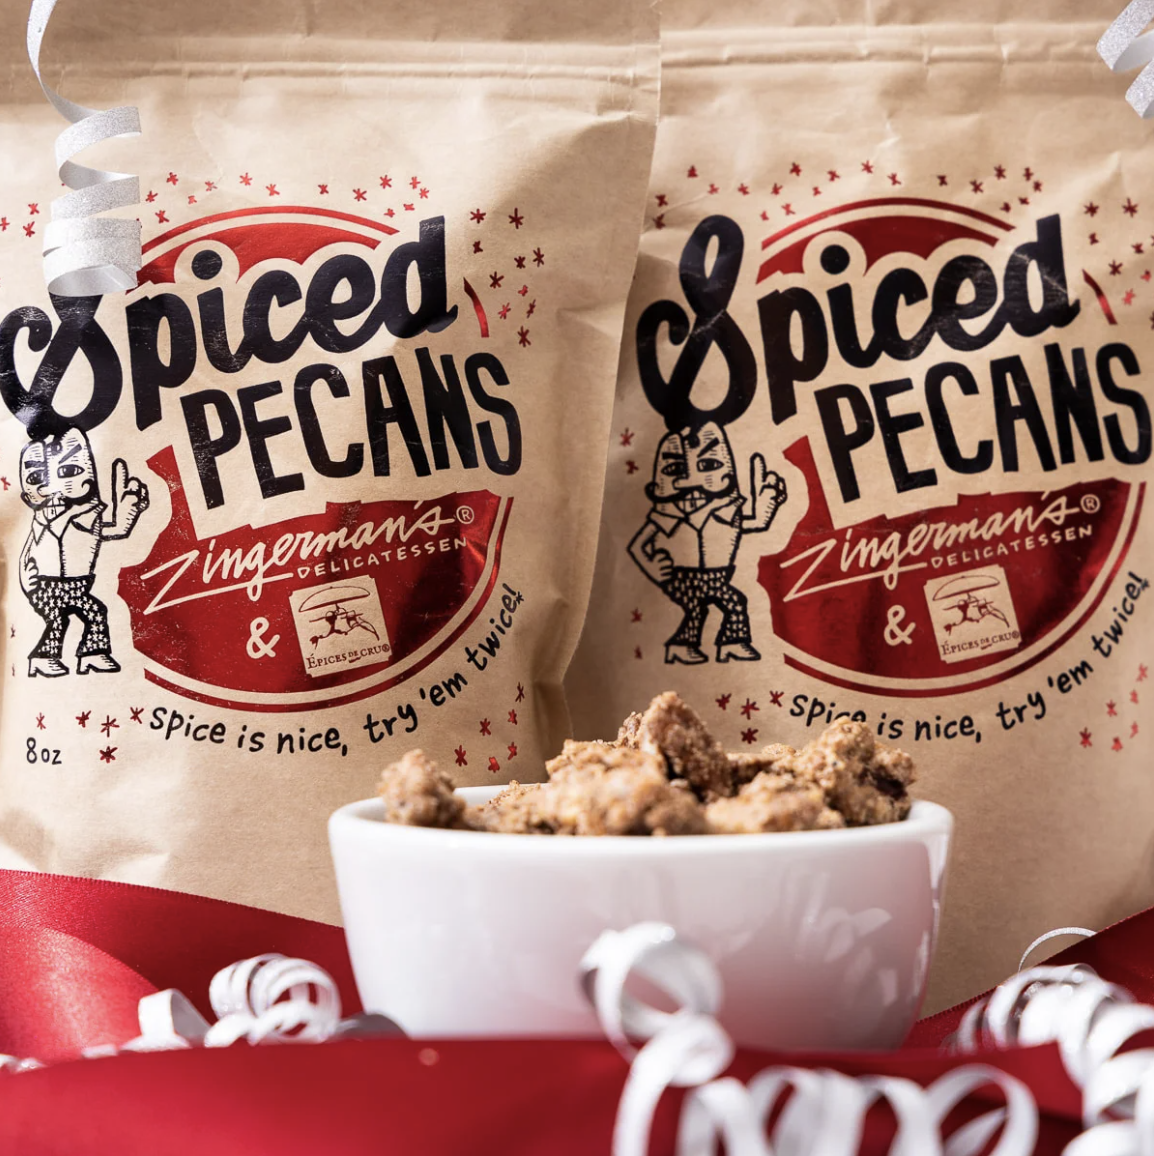 Zingerman’s Spiced Pecans. An annual holiday classic handcrafted across the ZCoB.